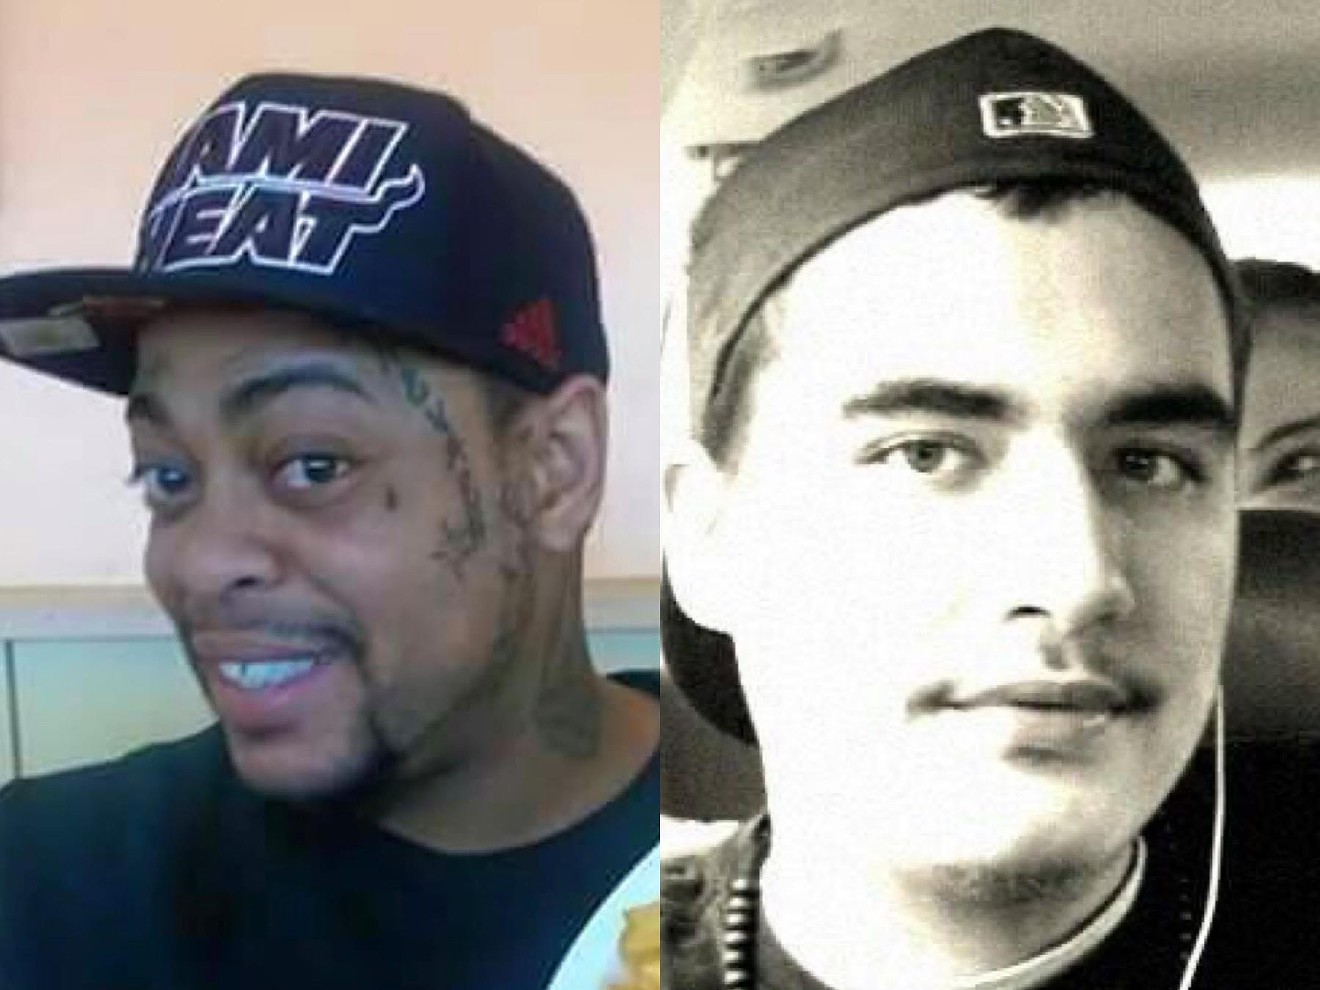 Edward Foster (left) and Sebastian Gregory were shot by police officers in Miami-Dade County.